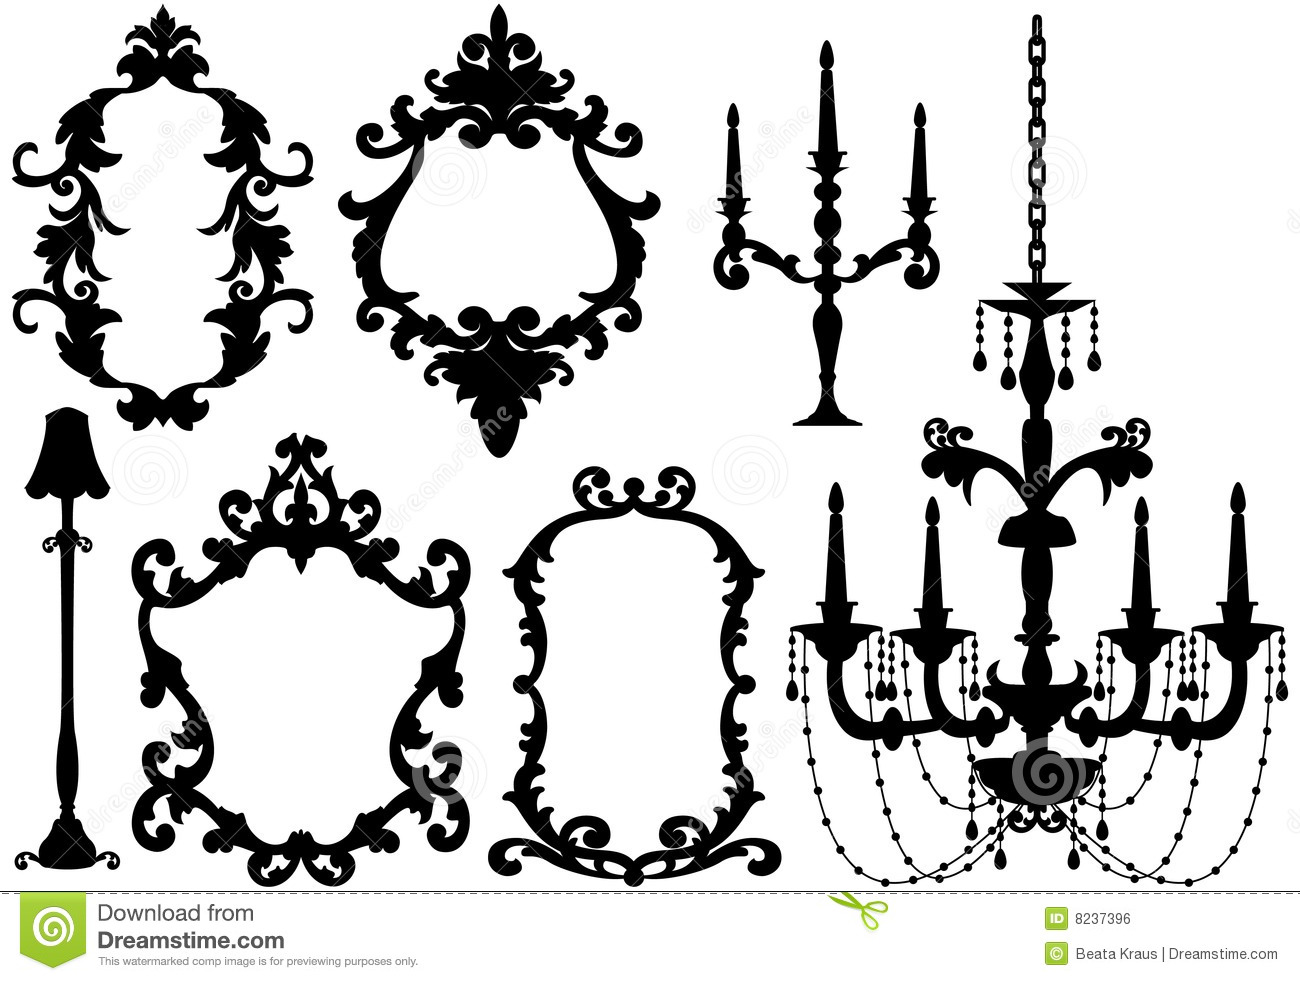 Antique Picture Frames And Chandelier Royalty Free Stock Image   Image